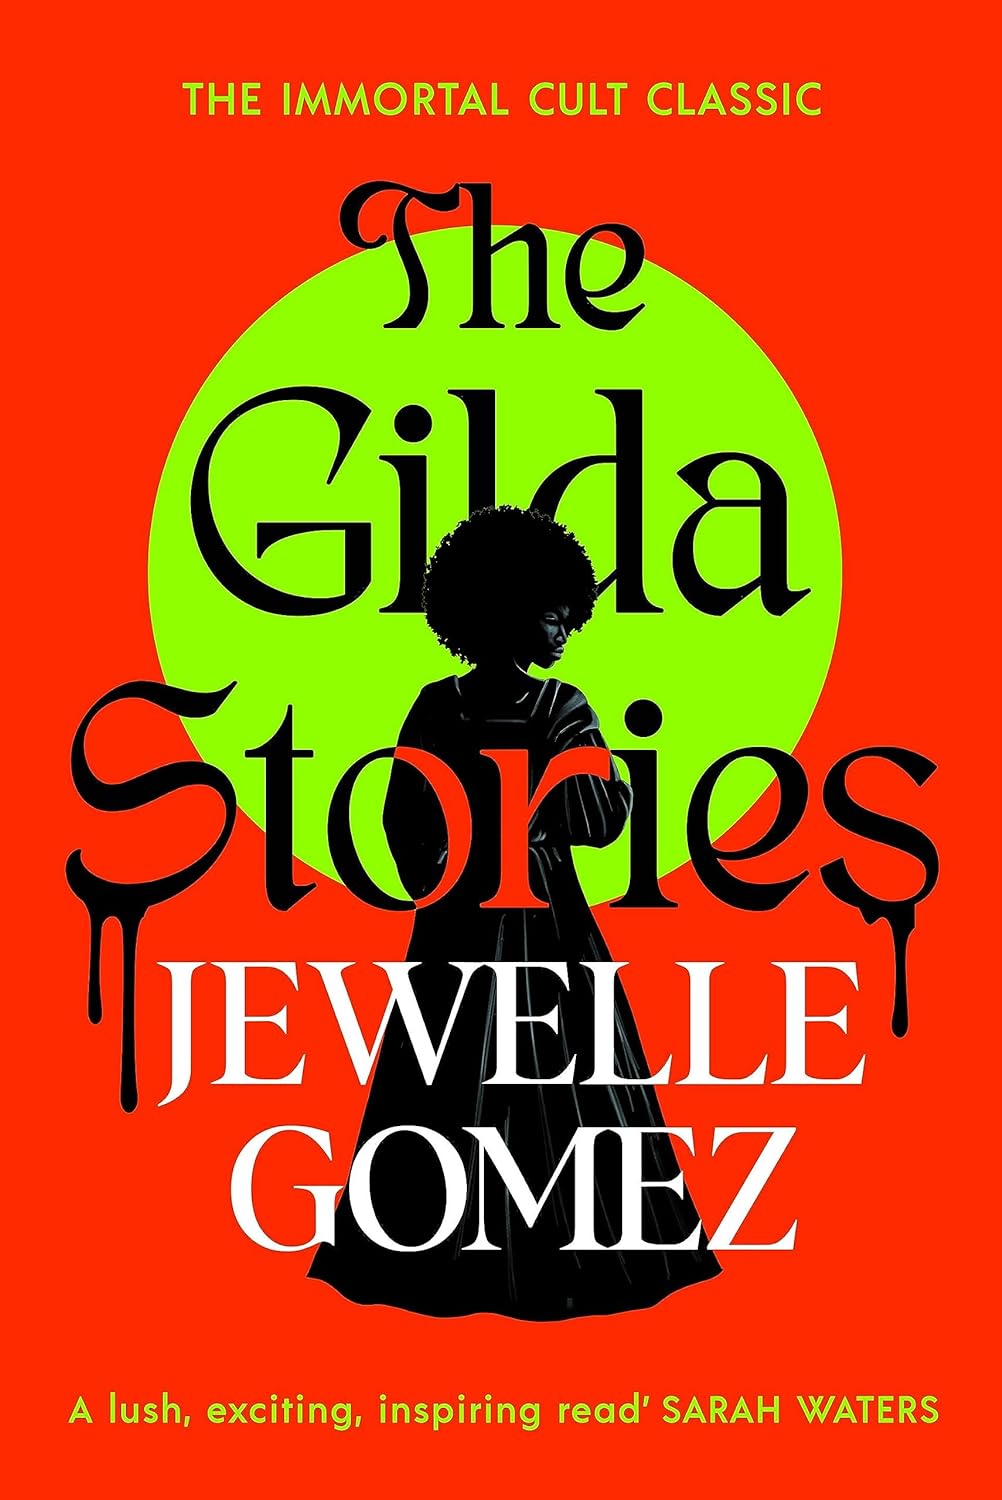 A young, black woman with an afro stands in the centre, looking over her shoulder at you. Dripping text reads "The Gilda Stories".